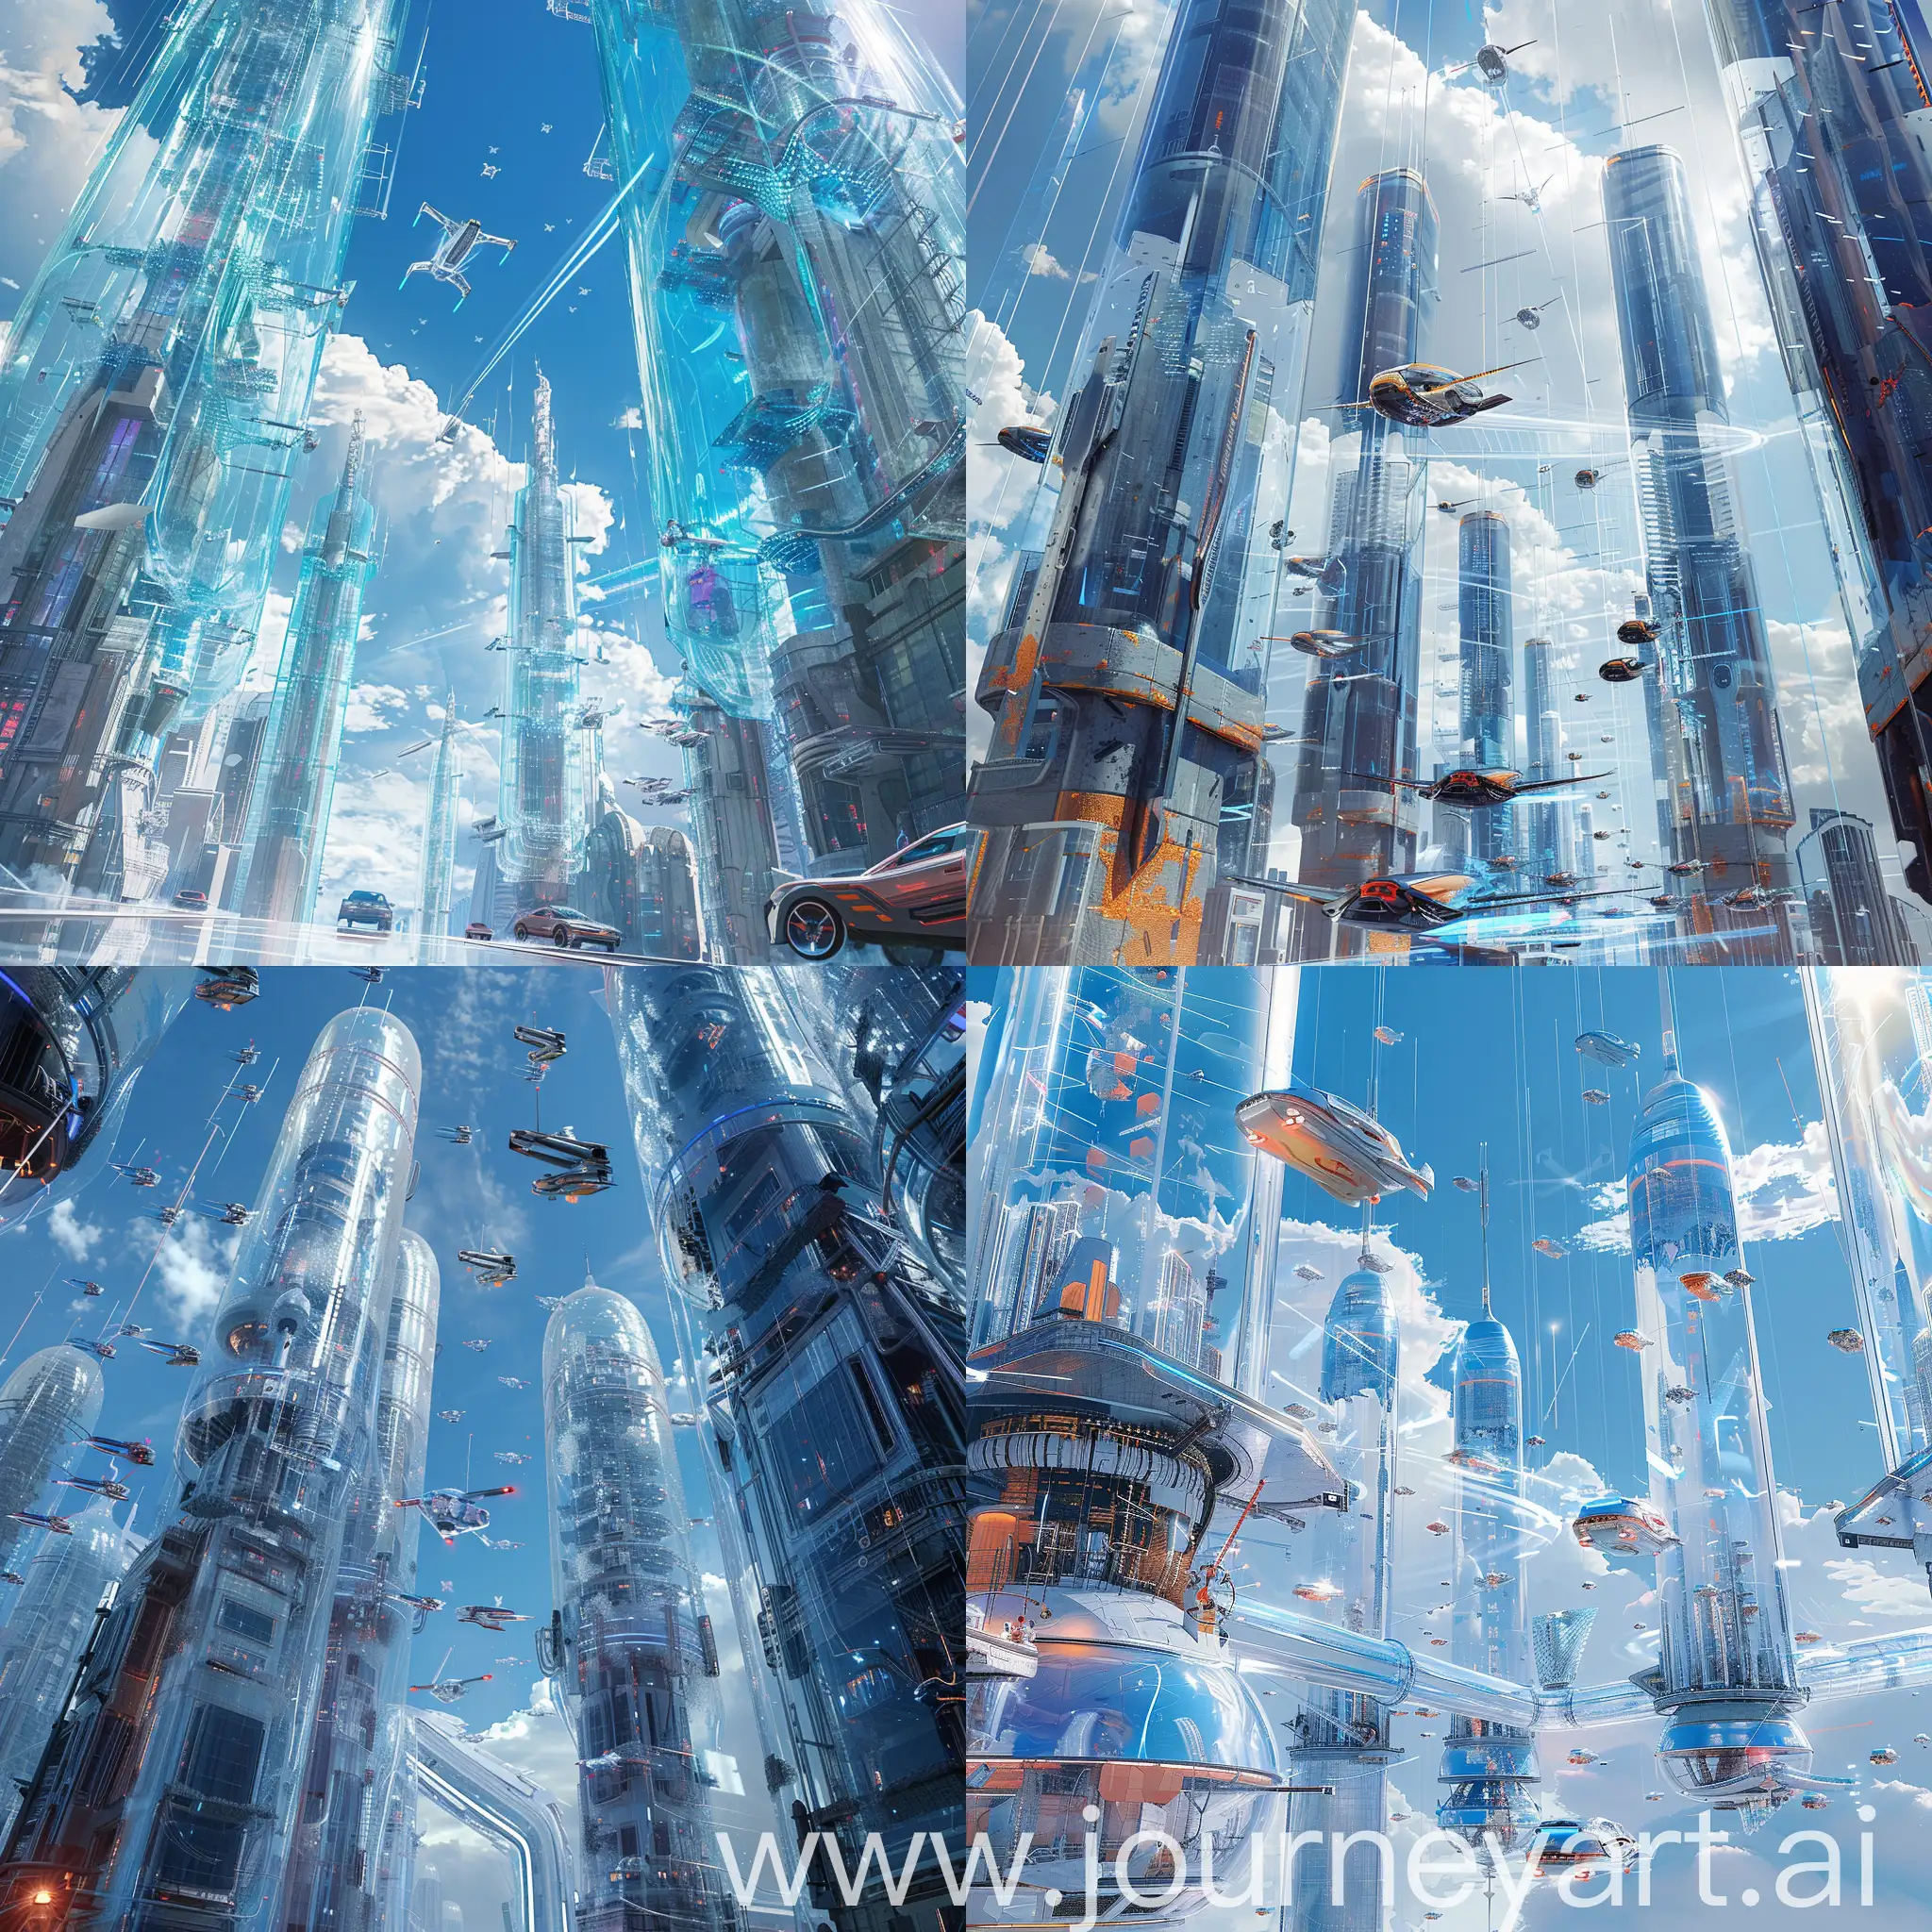 "Produce a stunning and realistic image of a futuristic city using Stable-Diffusion AI. Craft a highly detailed 8K scene featuring flying cars, varied glass structures with distinct weathering effects, ethereal lighting, and a vibrant blue sky. Utilize Octane Render for crisp focus, and infuse the composition with an elegant, digital painting style. Ensure the final output exhibits bright colors, aiming for a trending presence on ArtStation."